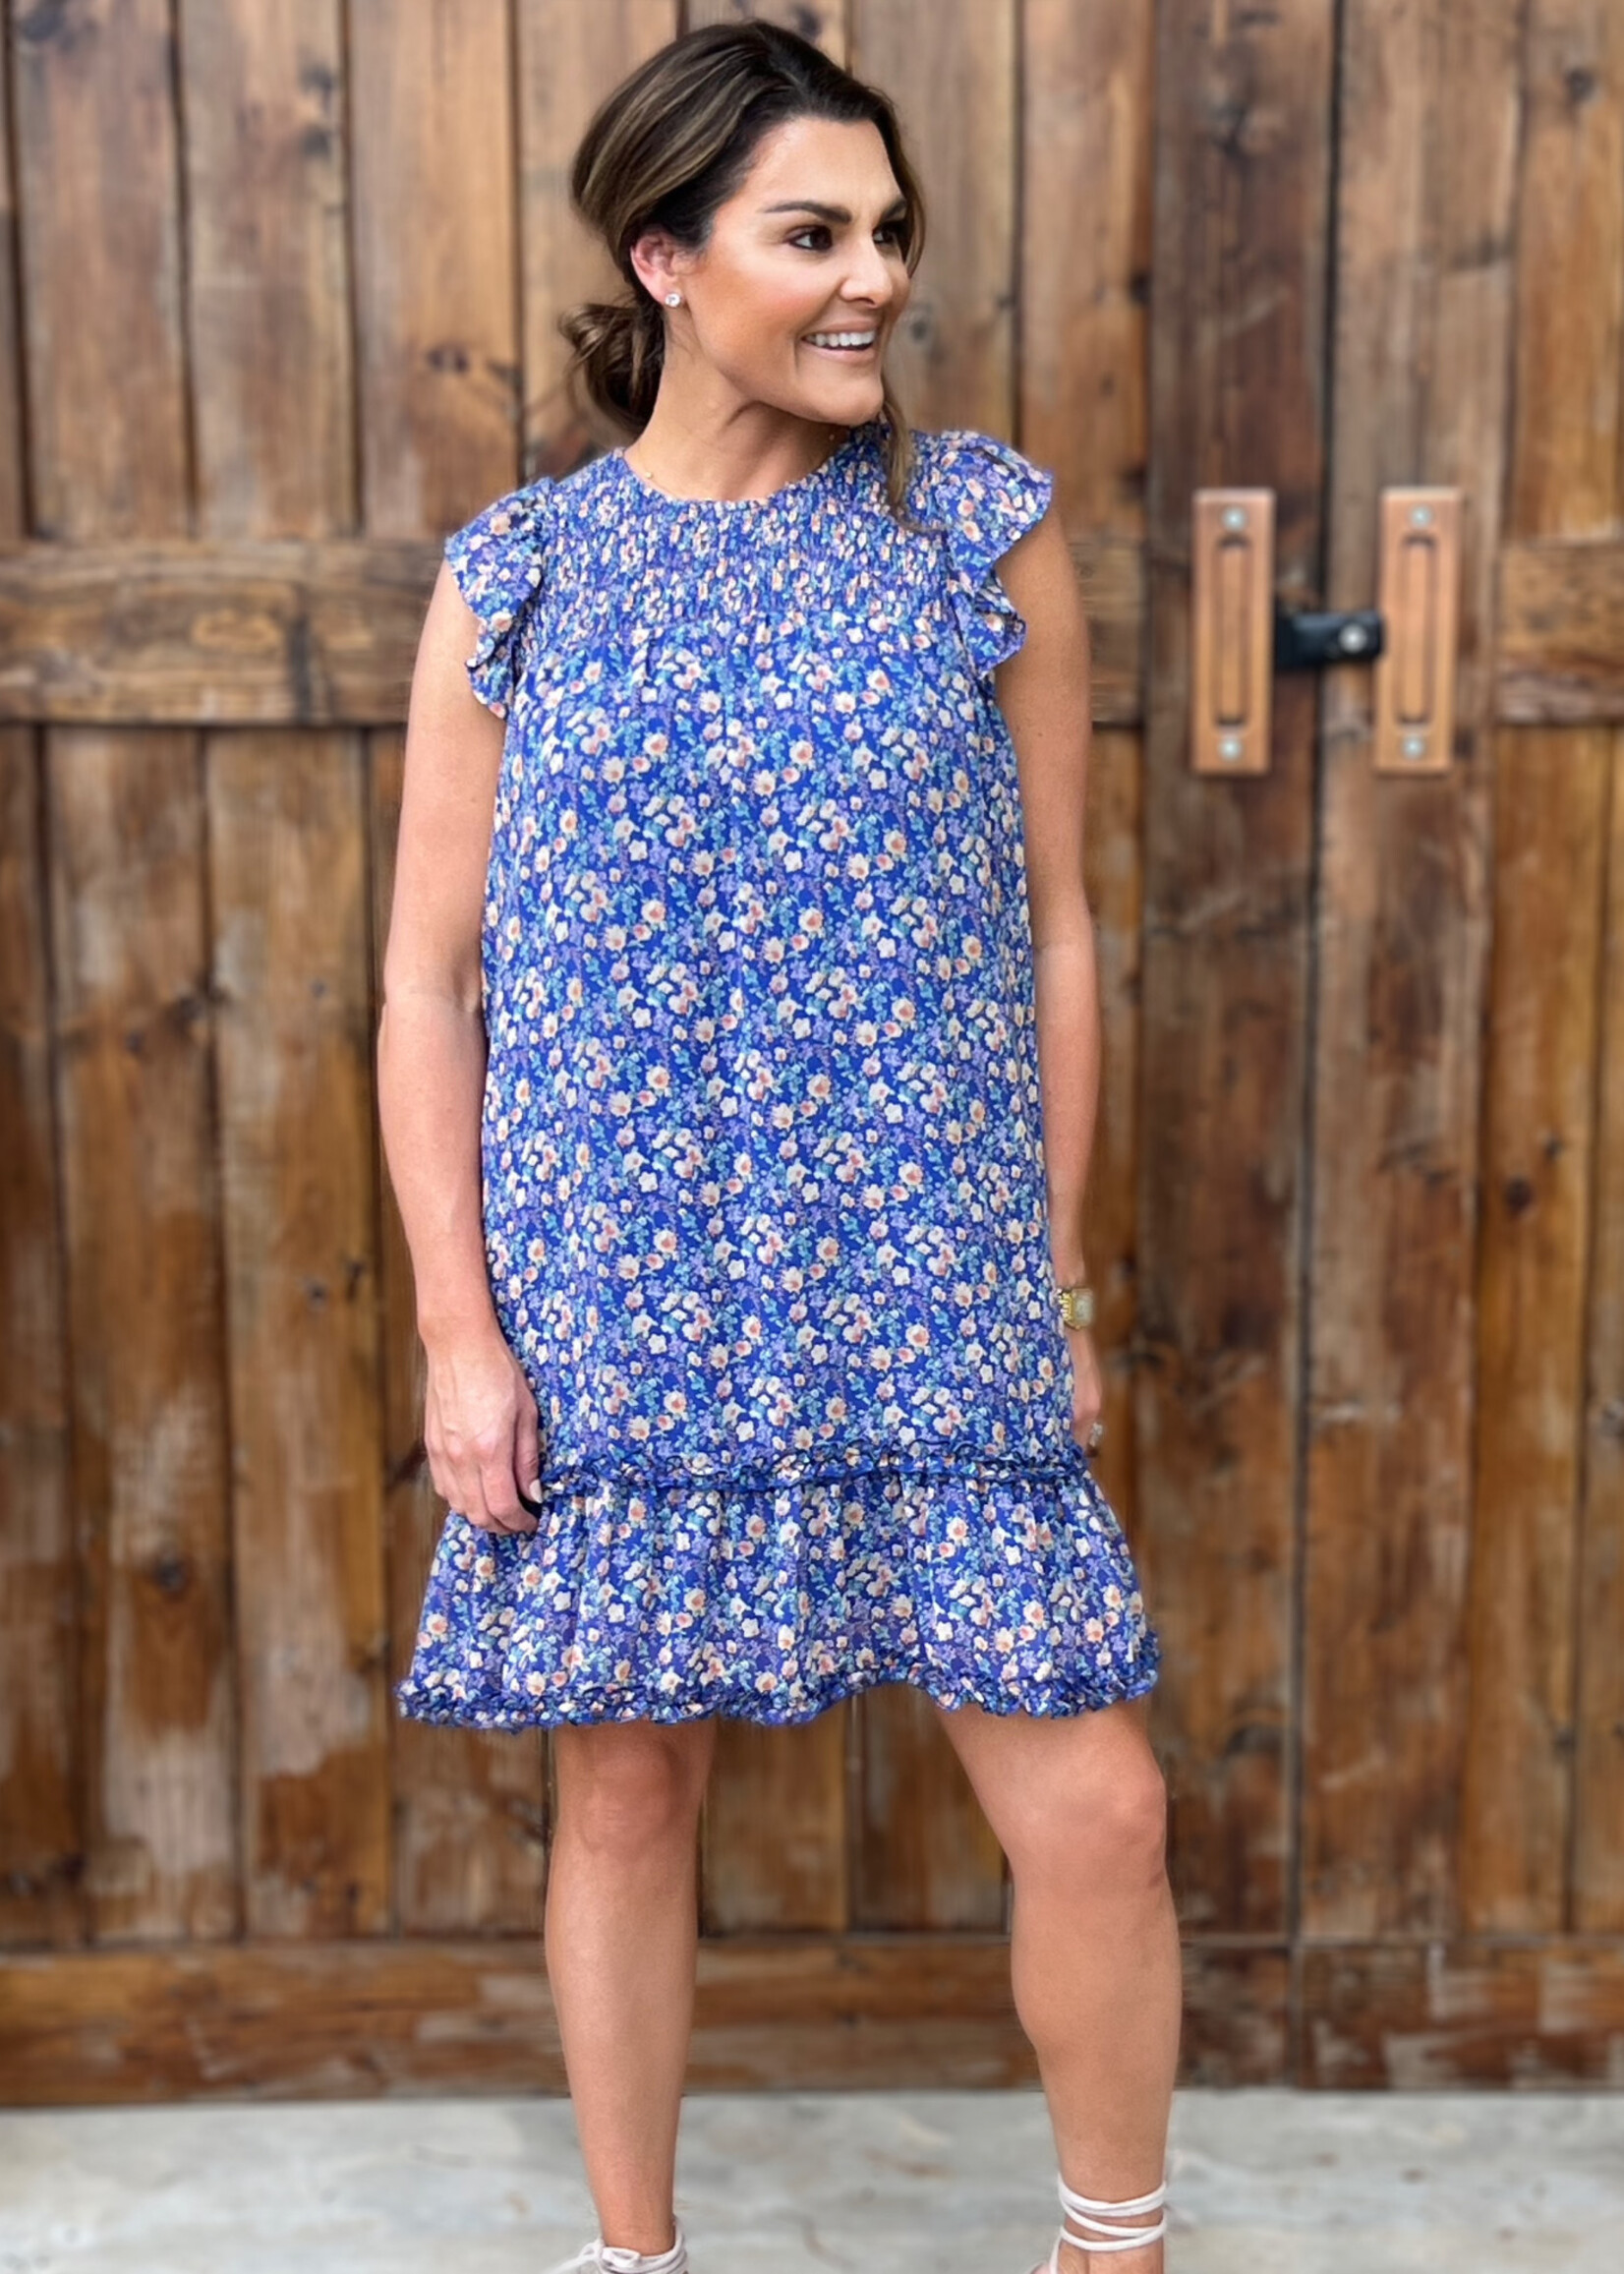 Bloom and Company Butterfly Sleeve Smocked Woven Floral Print Dress